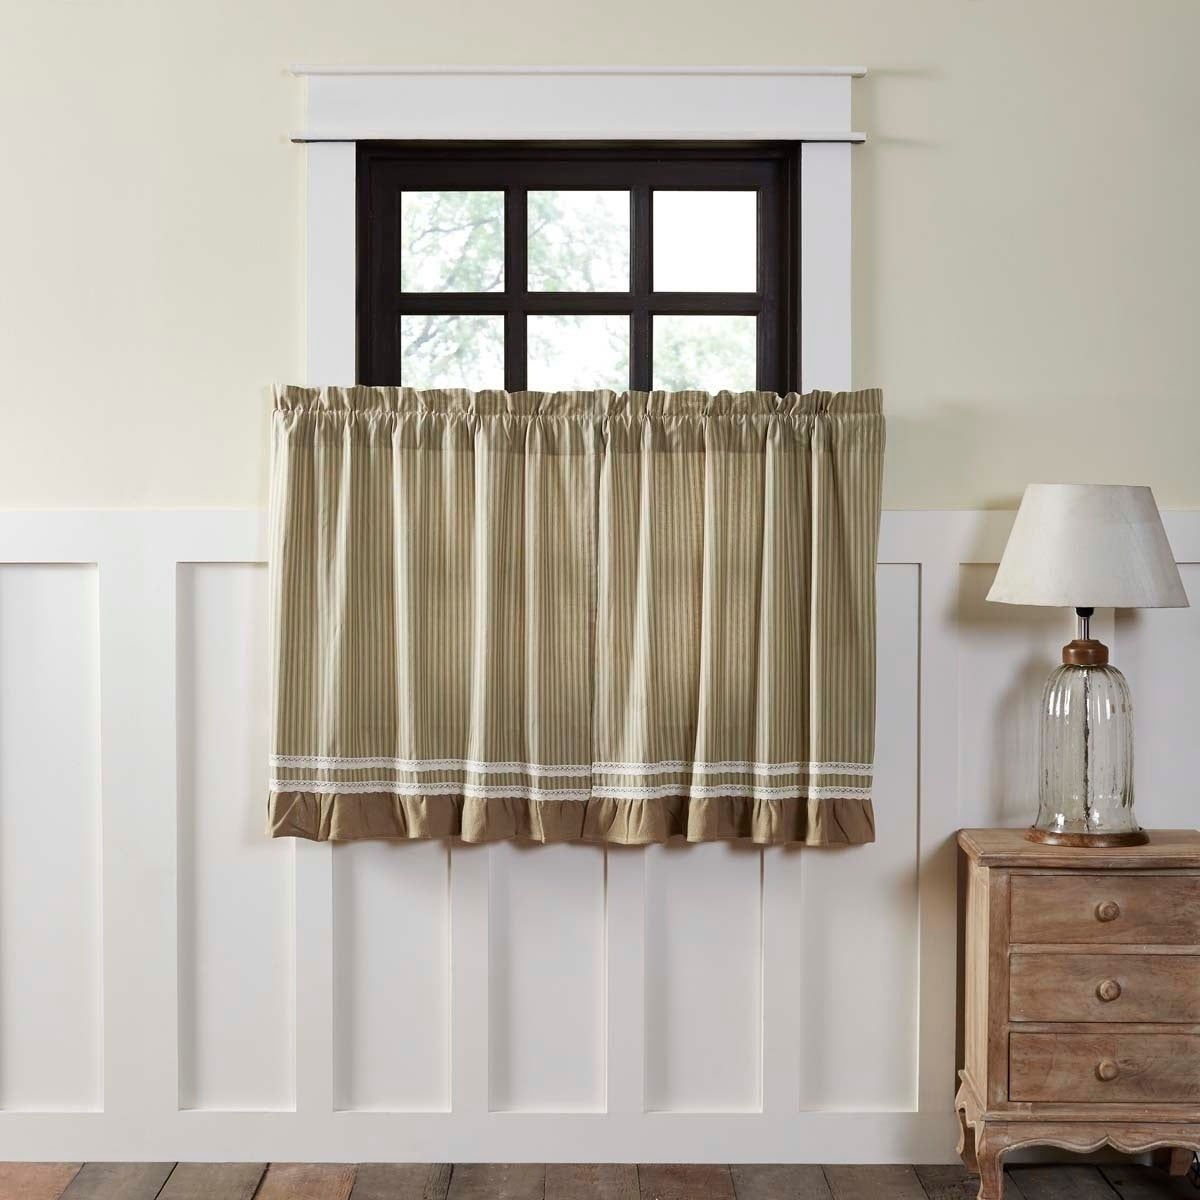 Featured Photo of 20 Inspirations Rod Pocket Cotton Striped Lace Cotton Burlap Kitchen Curtains